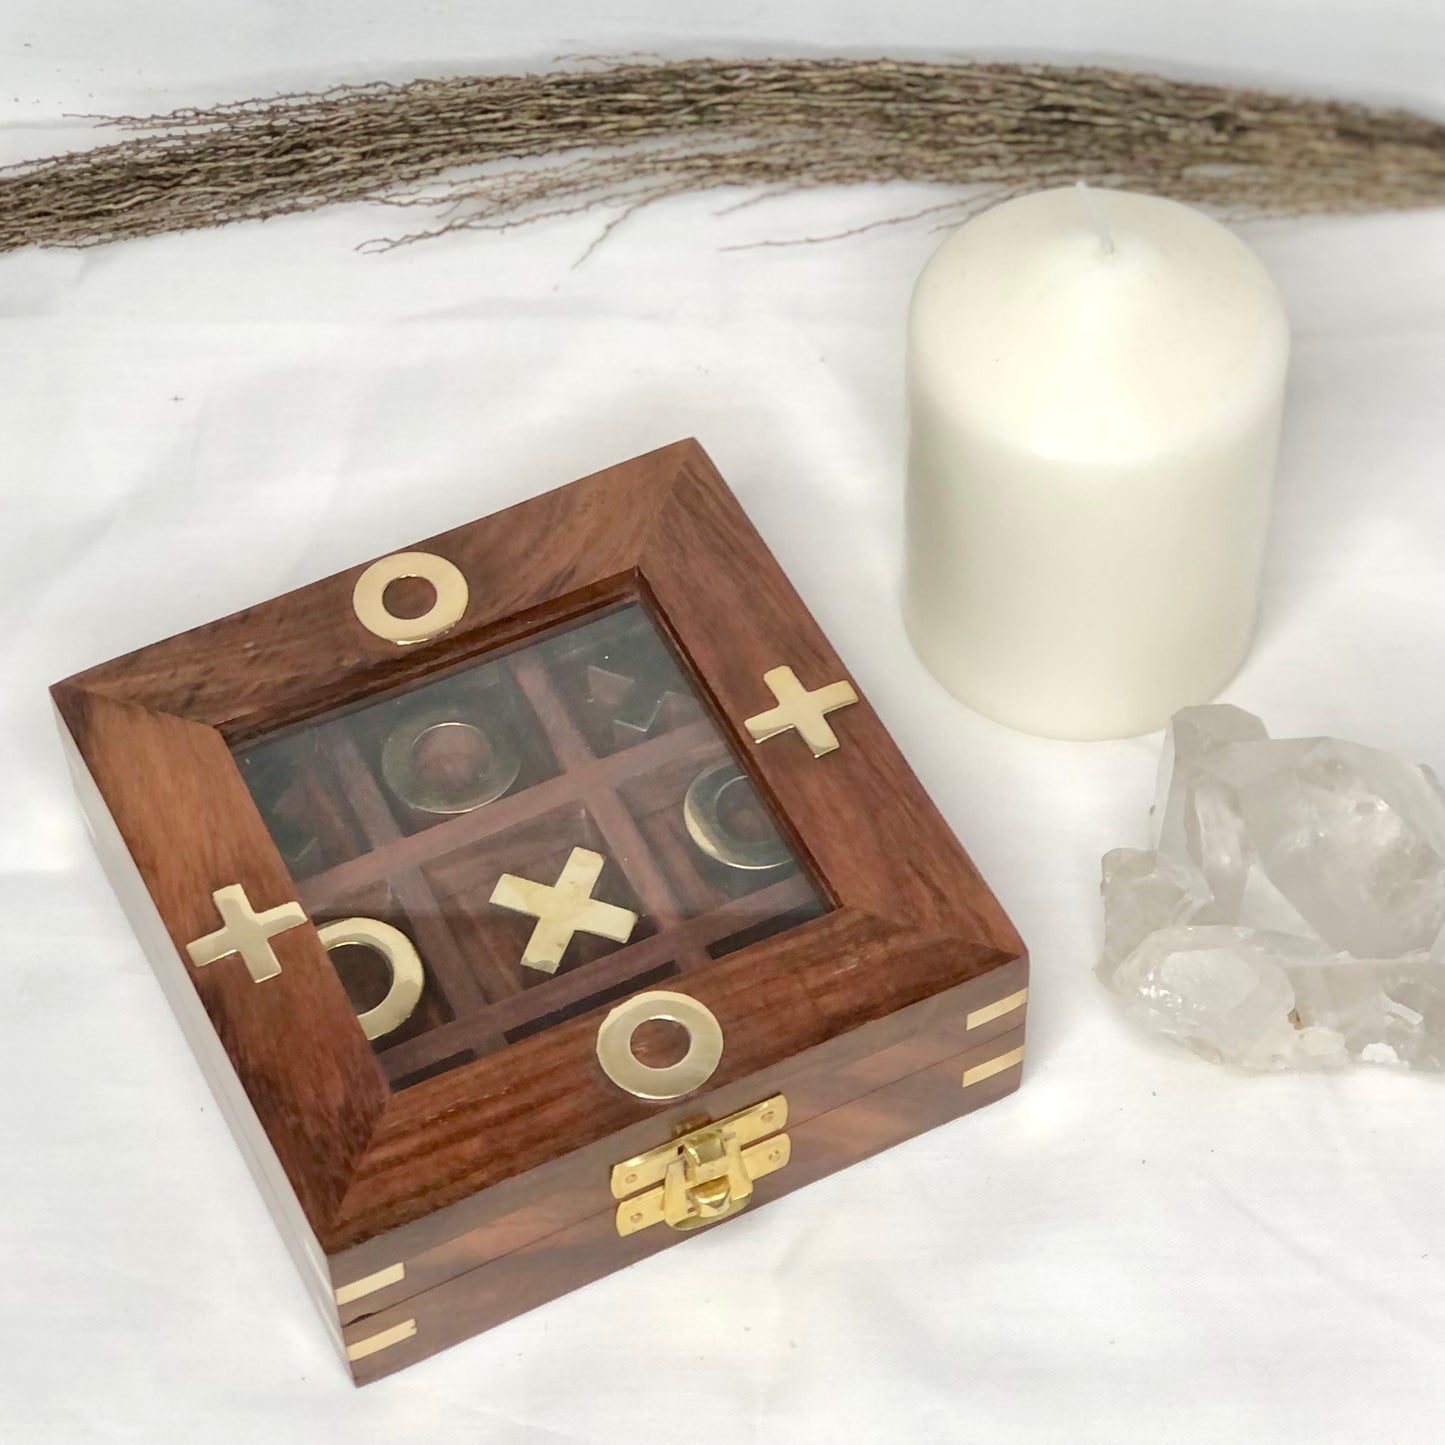 Hand crafted wood, glass + brass game box